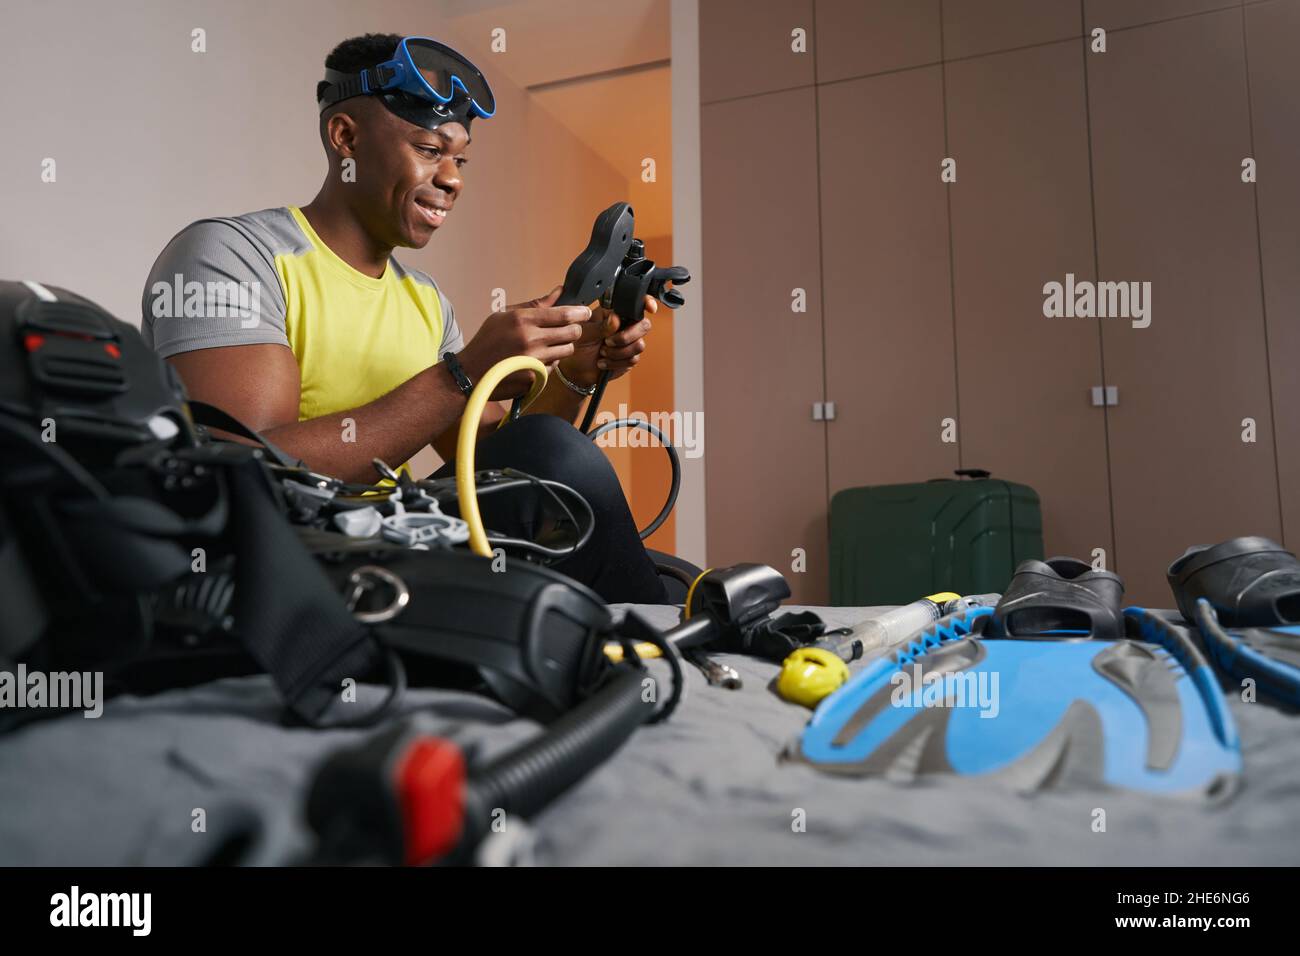 Cheerful man smiling while working with scuba set Stock Photo